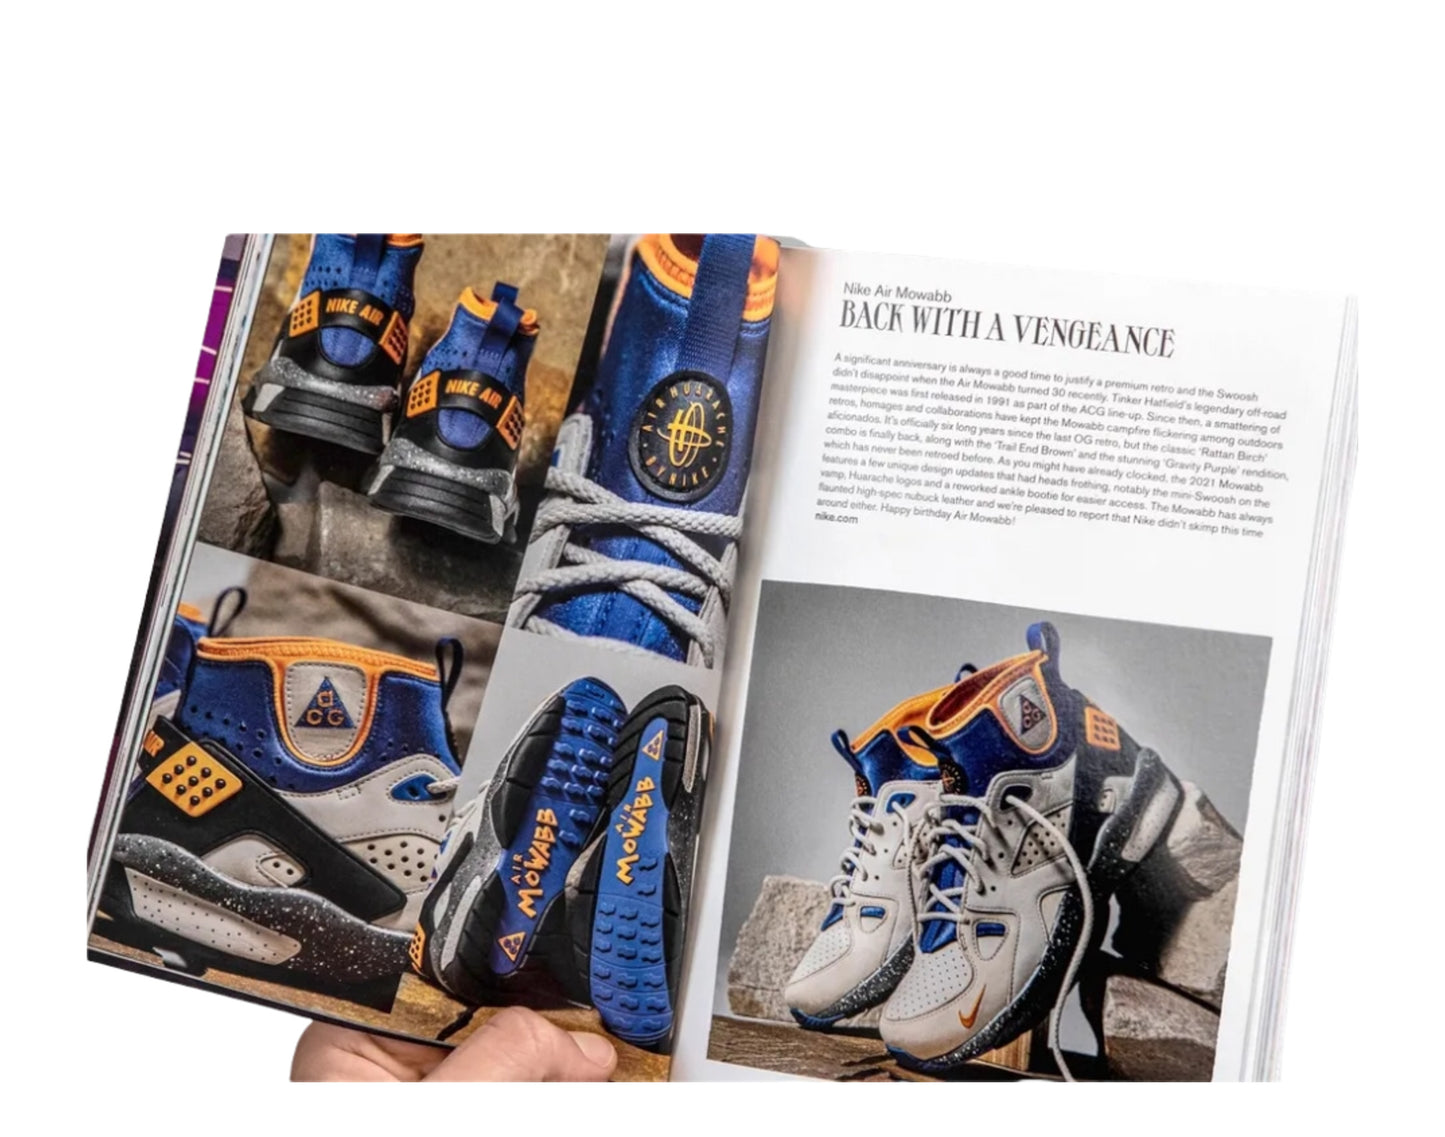 Sneaker Freaker Magazine Issue # 46 - Air Max Plus Copycats, Bootlegs and Lawsuits Cover